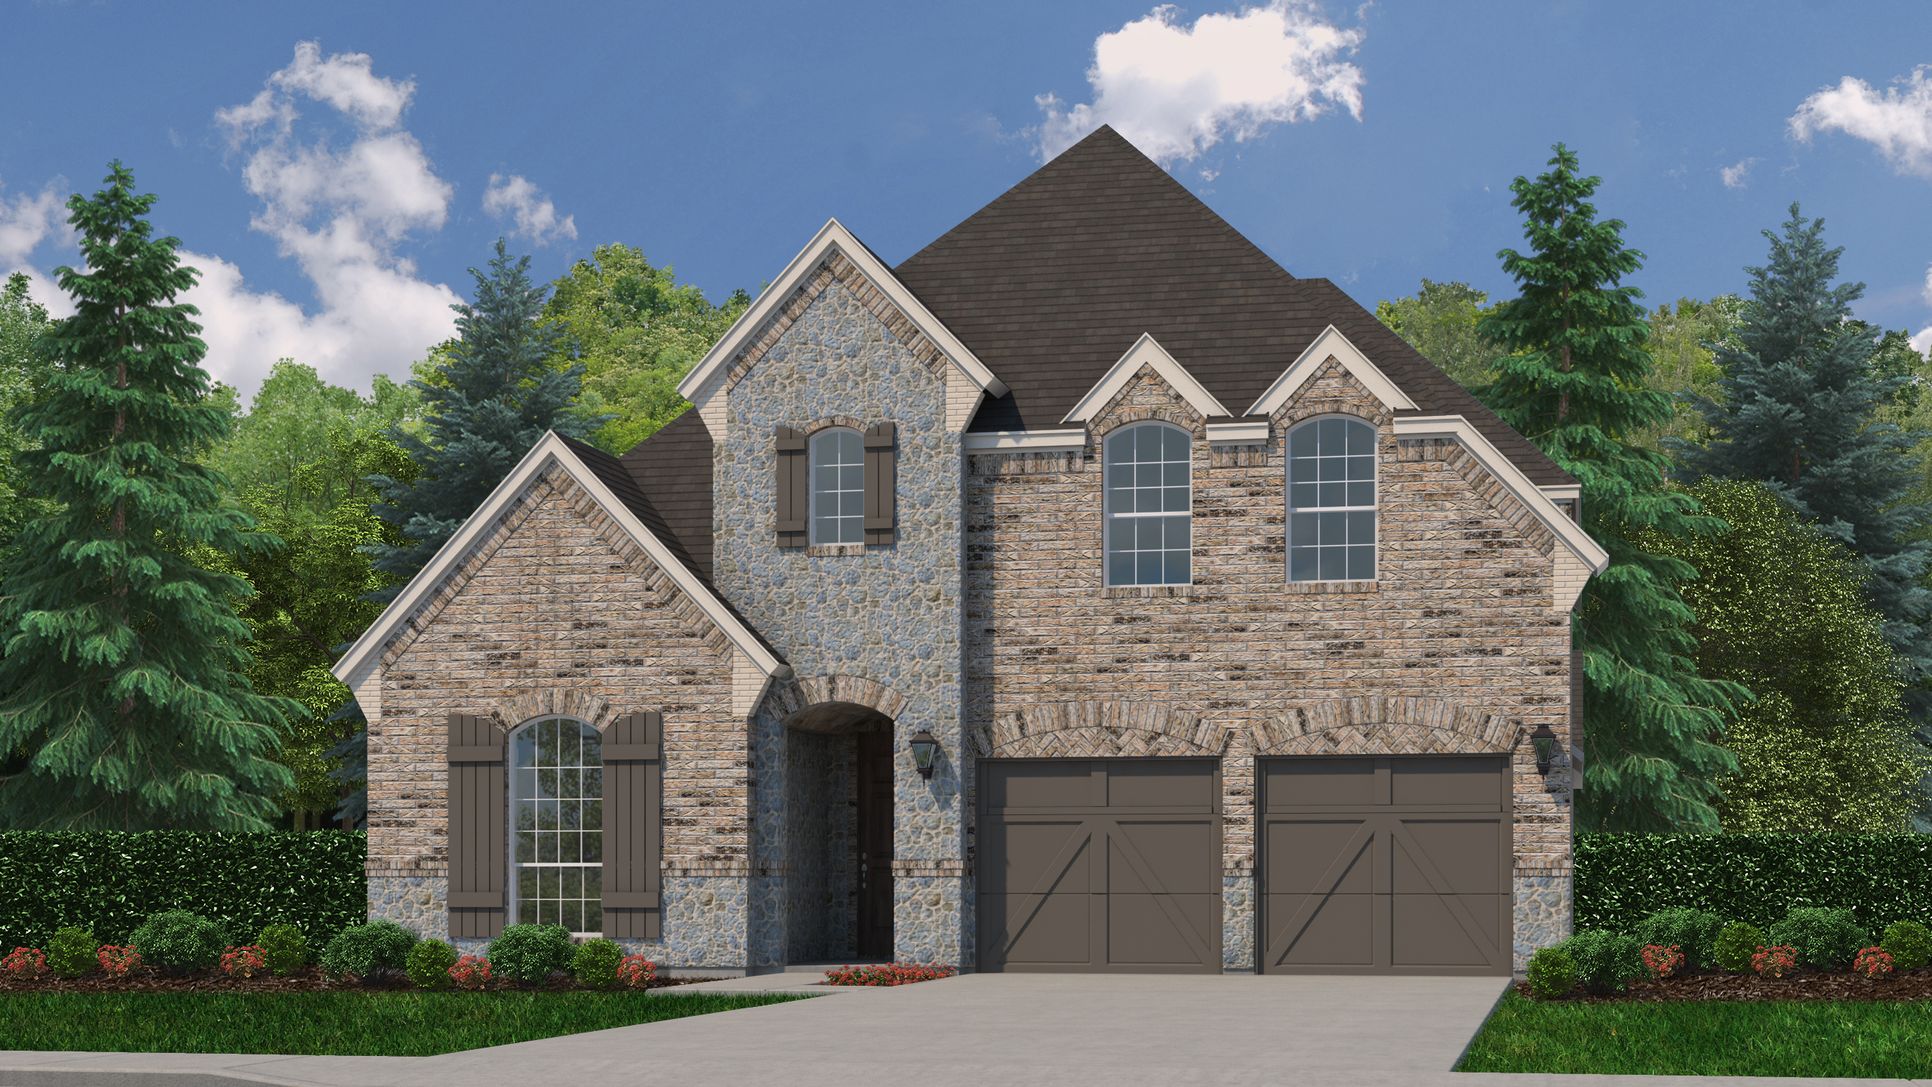 Exterior:Plan 1135 Elevation C with Stone